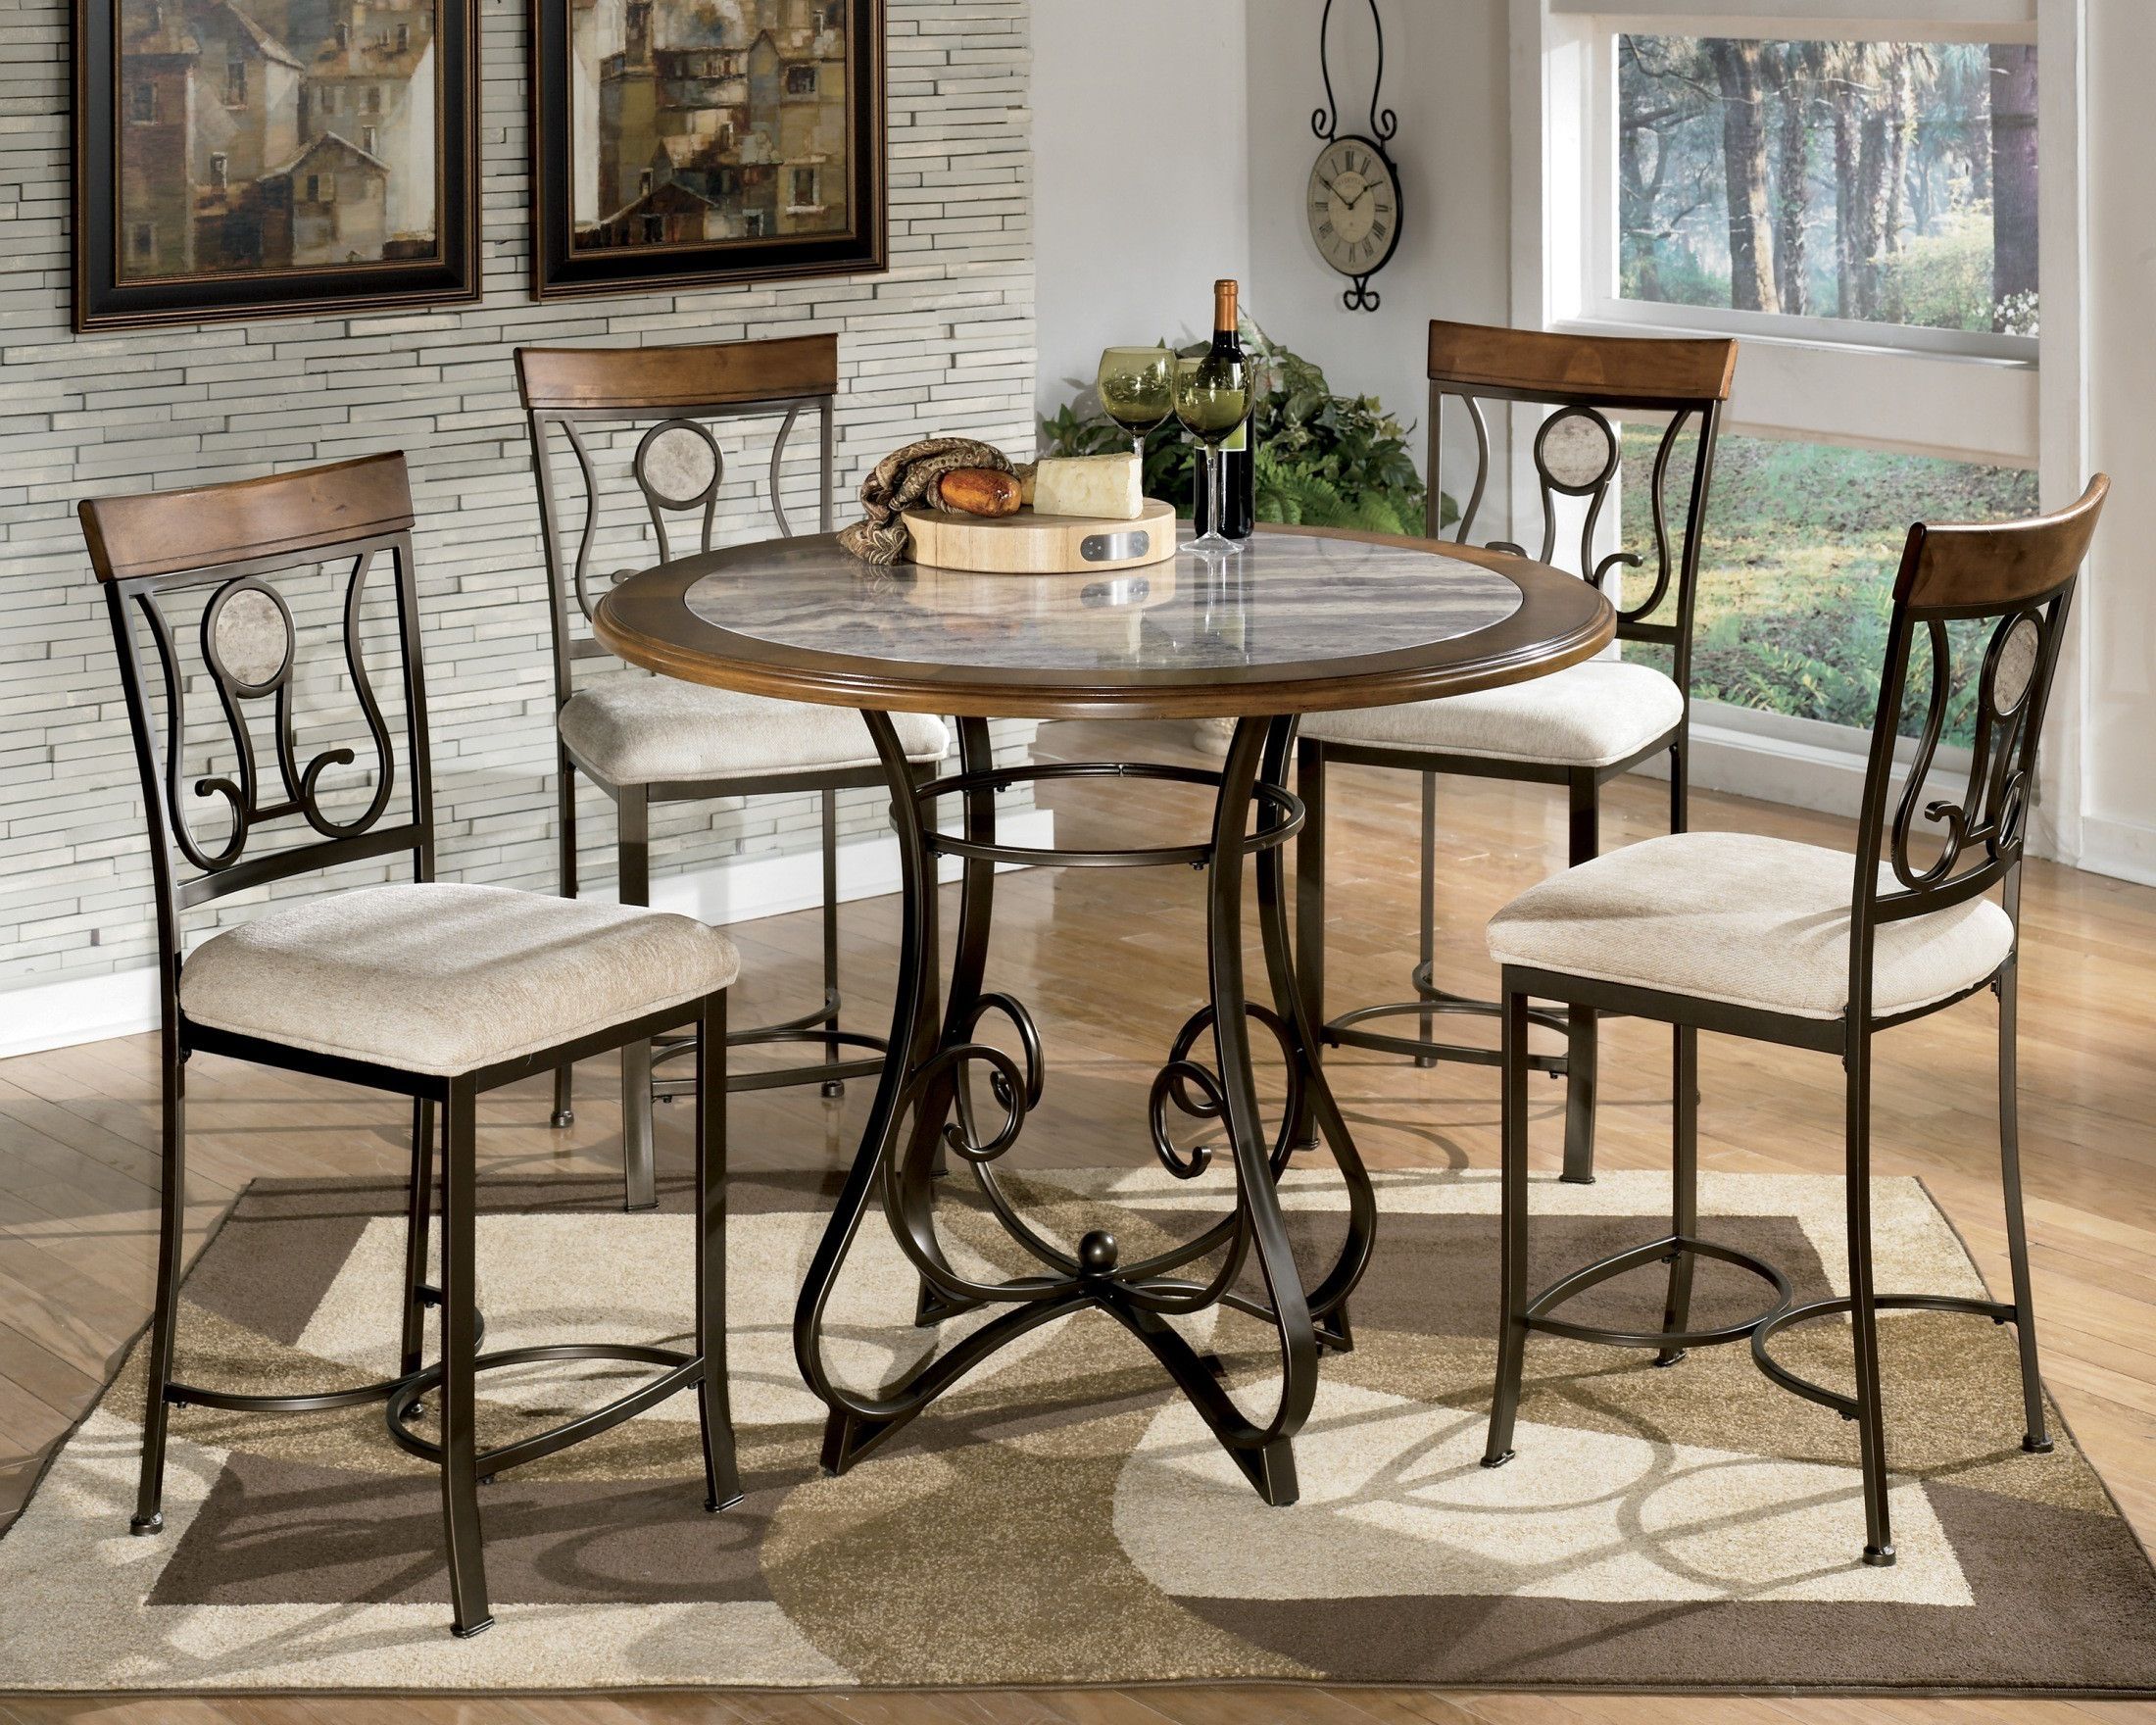 Trendy Hearne Counter Height Dining Tables Within Hopstand Round Counter Height Dining Table, D314 13t B (View 11 of 20)